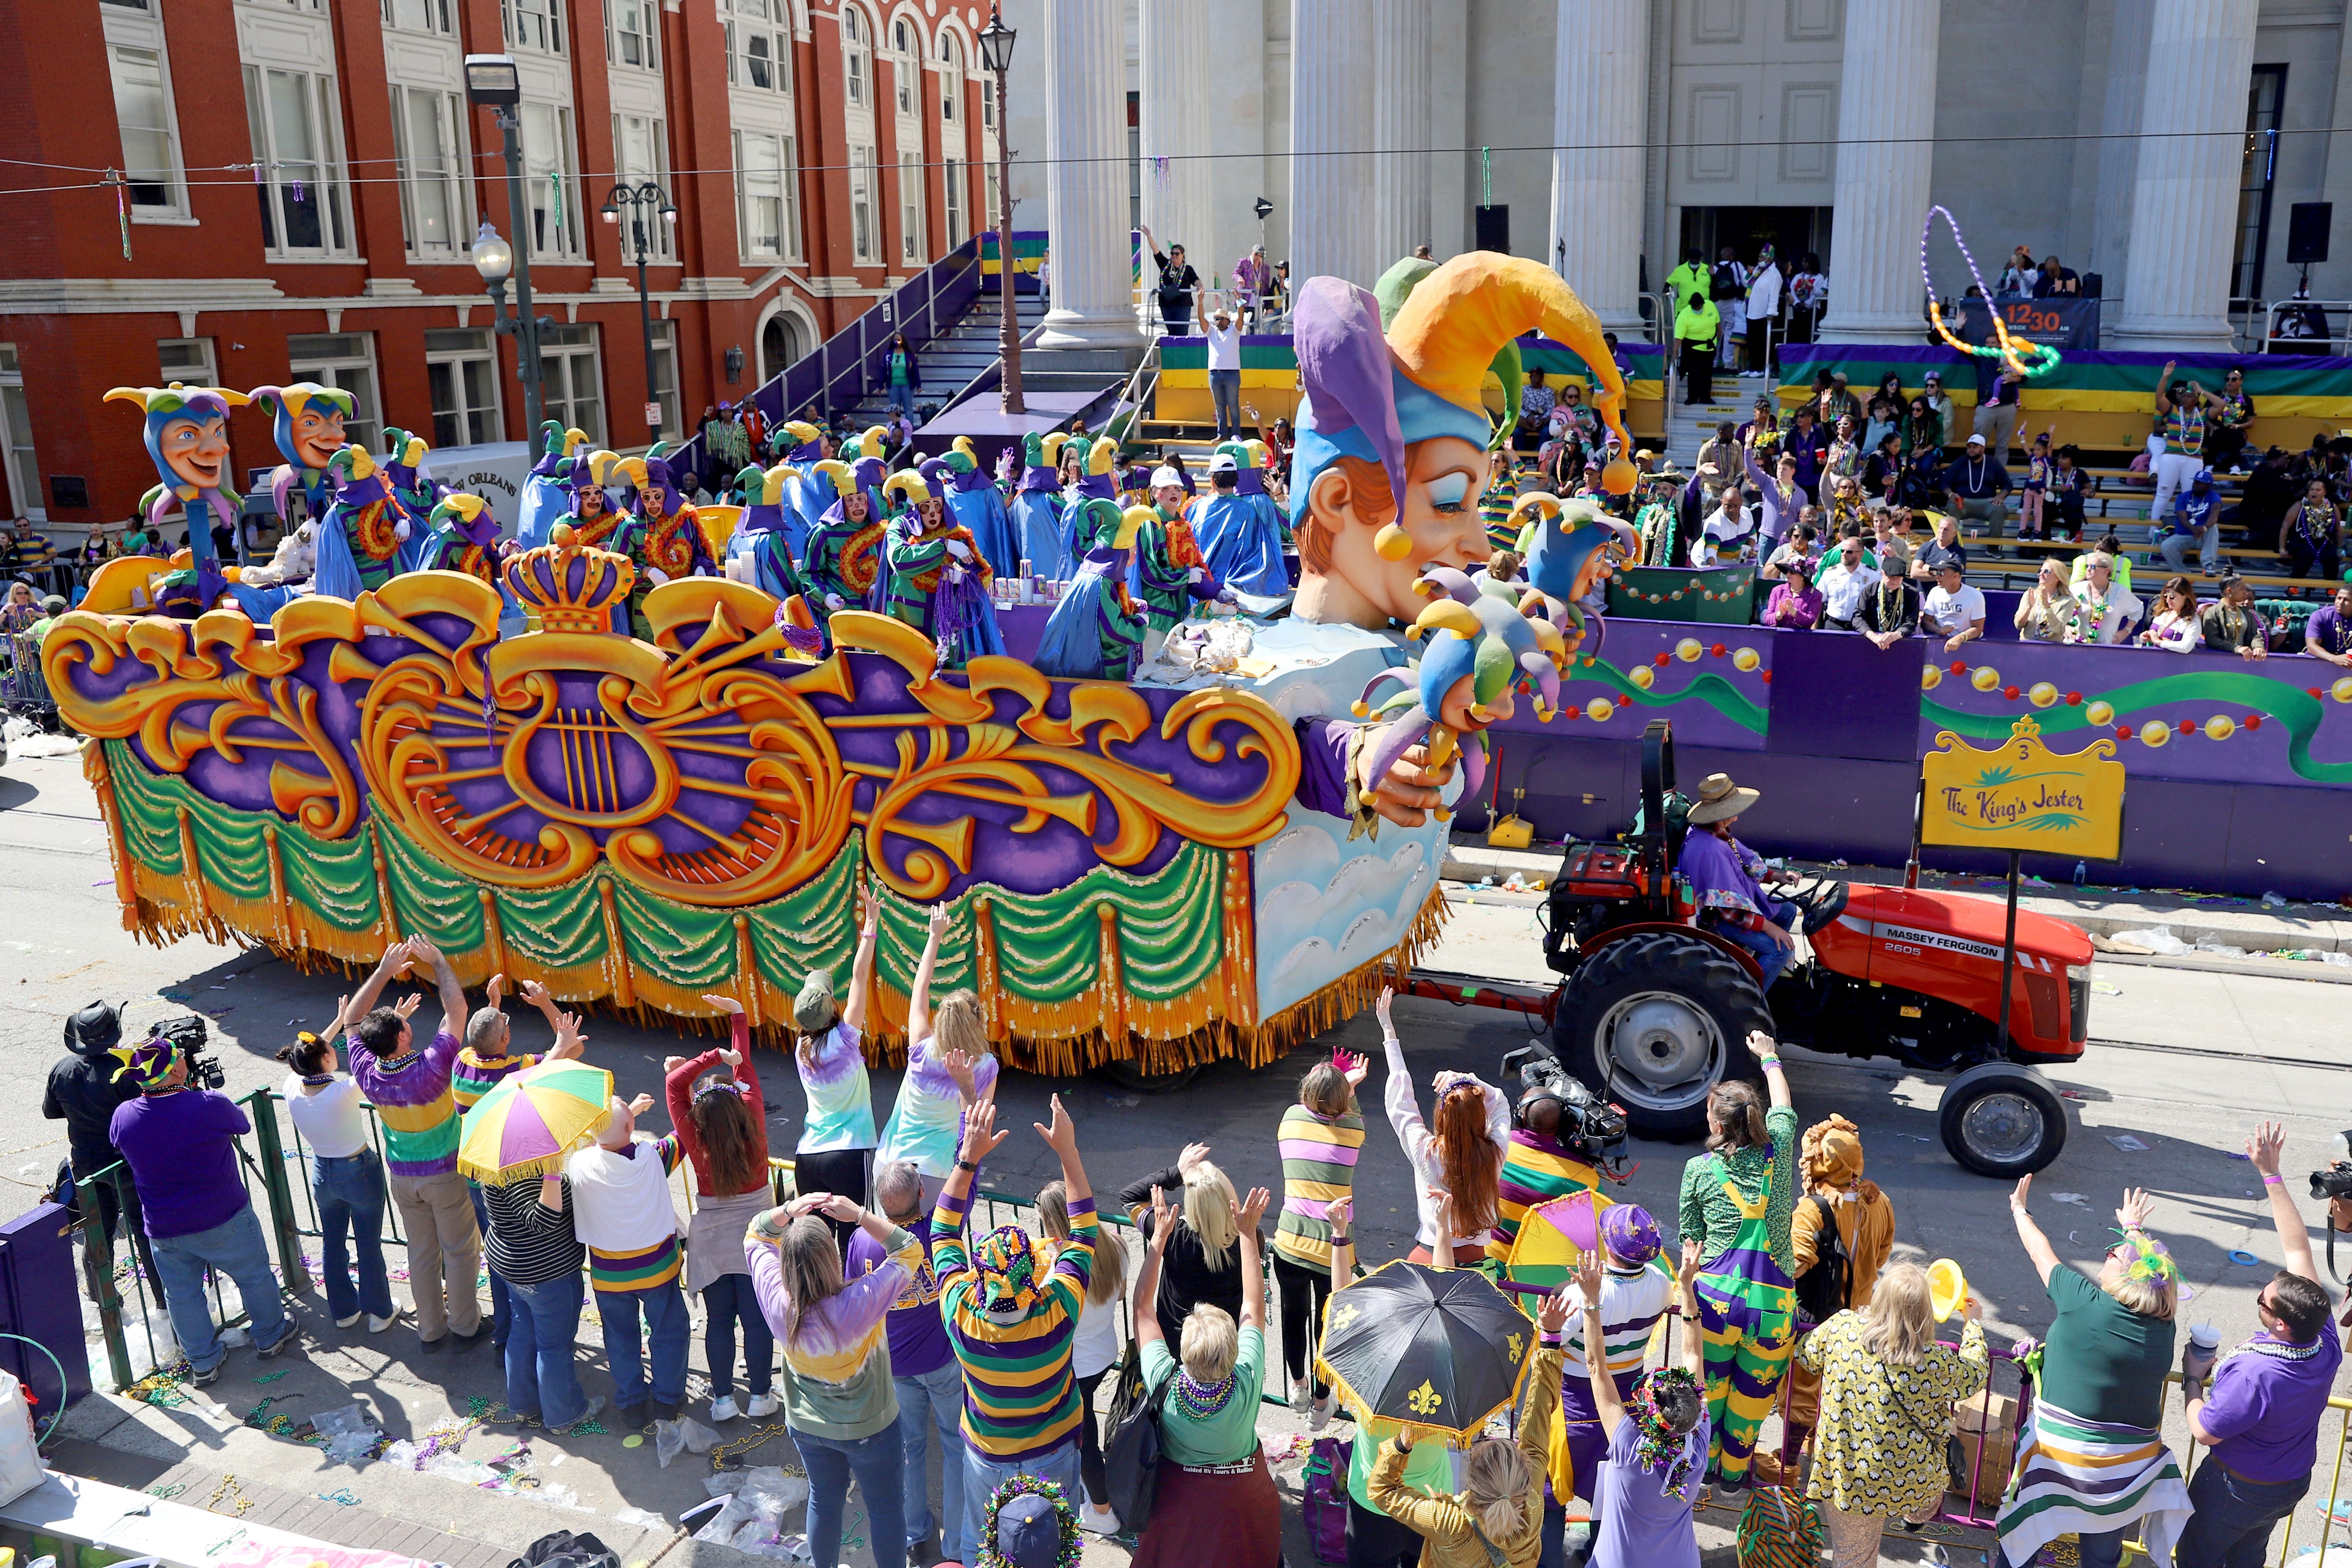 a float makes its way down the street at a Mardi Gras parade 2022